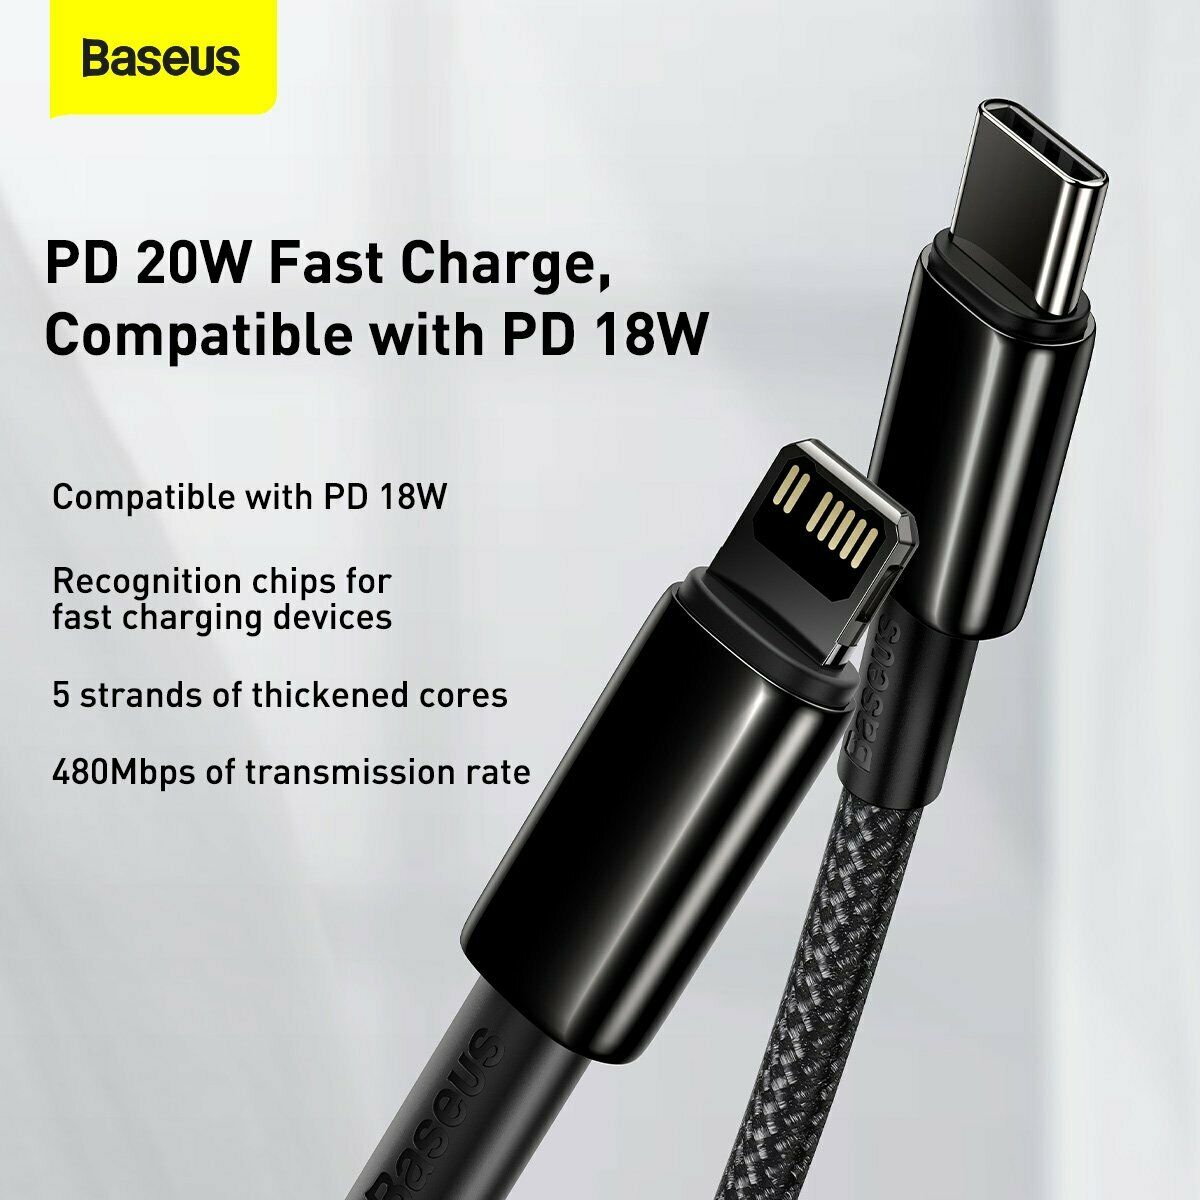 Baseus PD 20W Type C For Apple Fast Charging Charger Cable For iPhone 12 Max